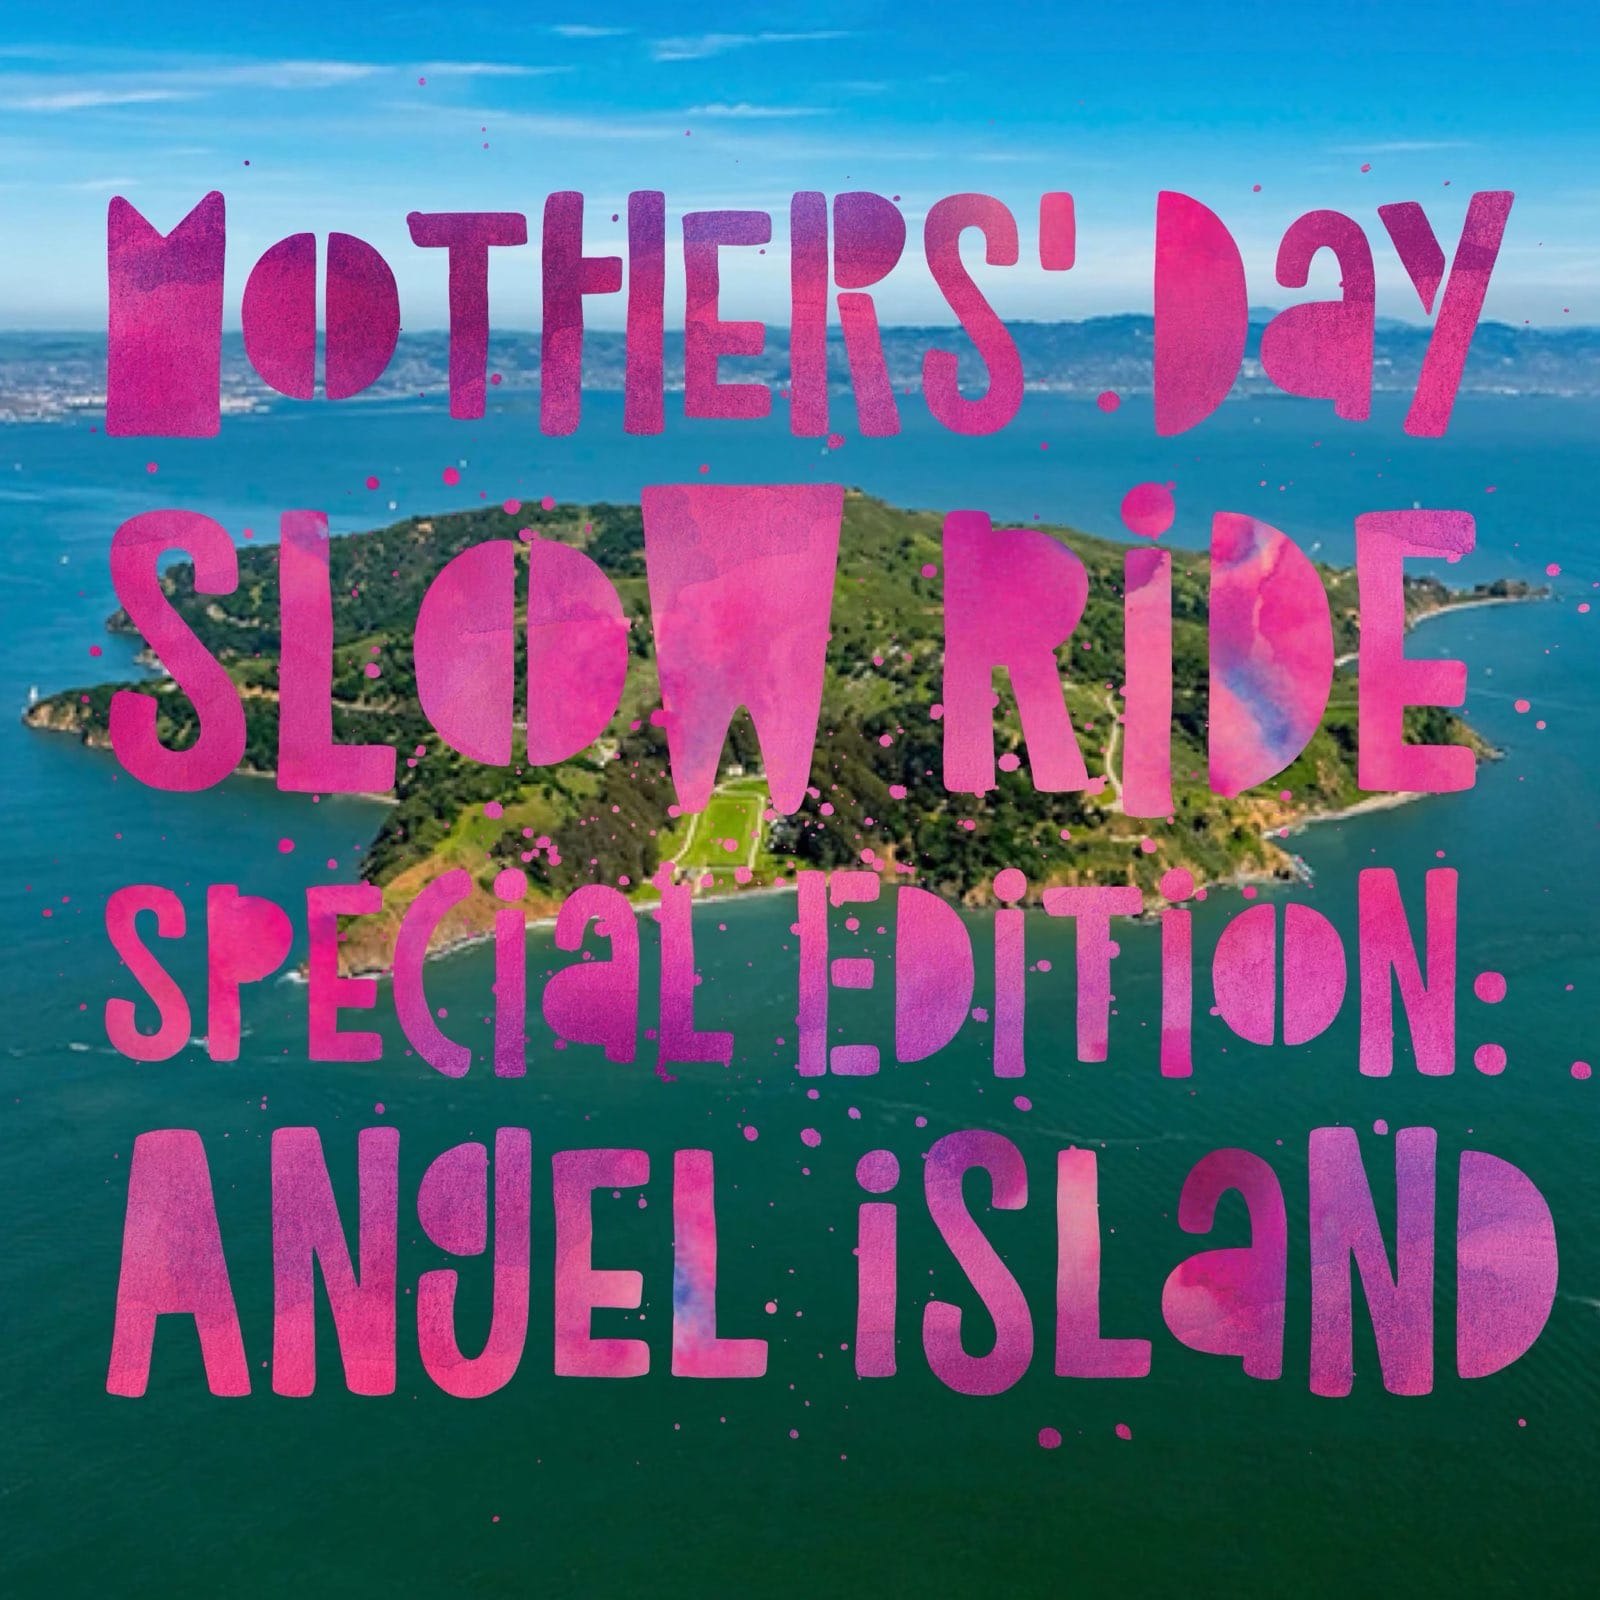 Mothers' Day Special Edition Slow Ride: Angel Island - Sunday May 12th, 11:30am